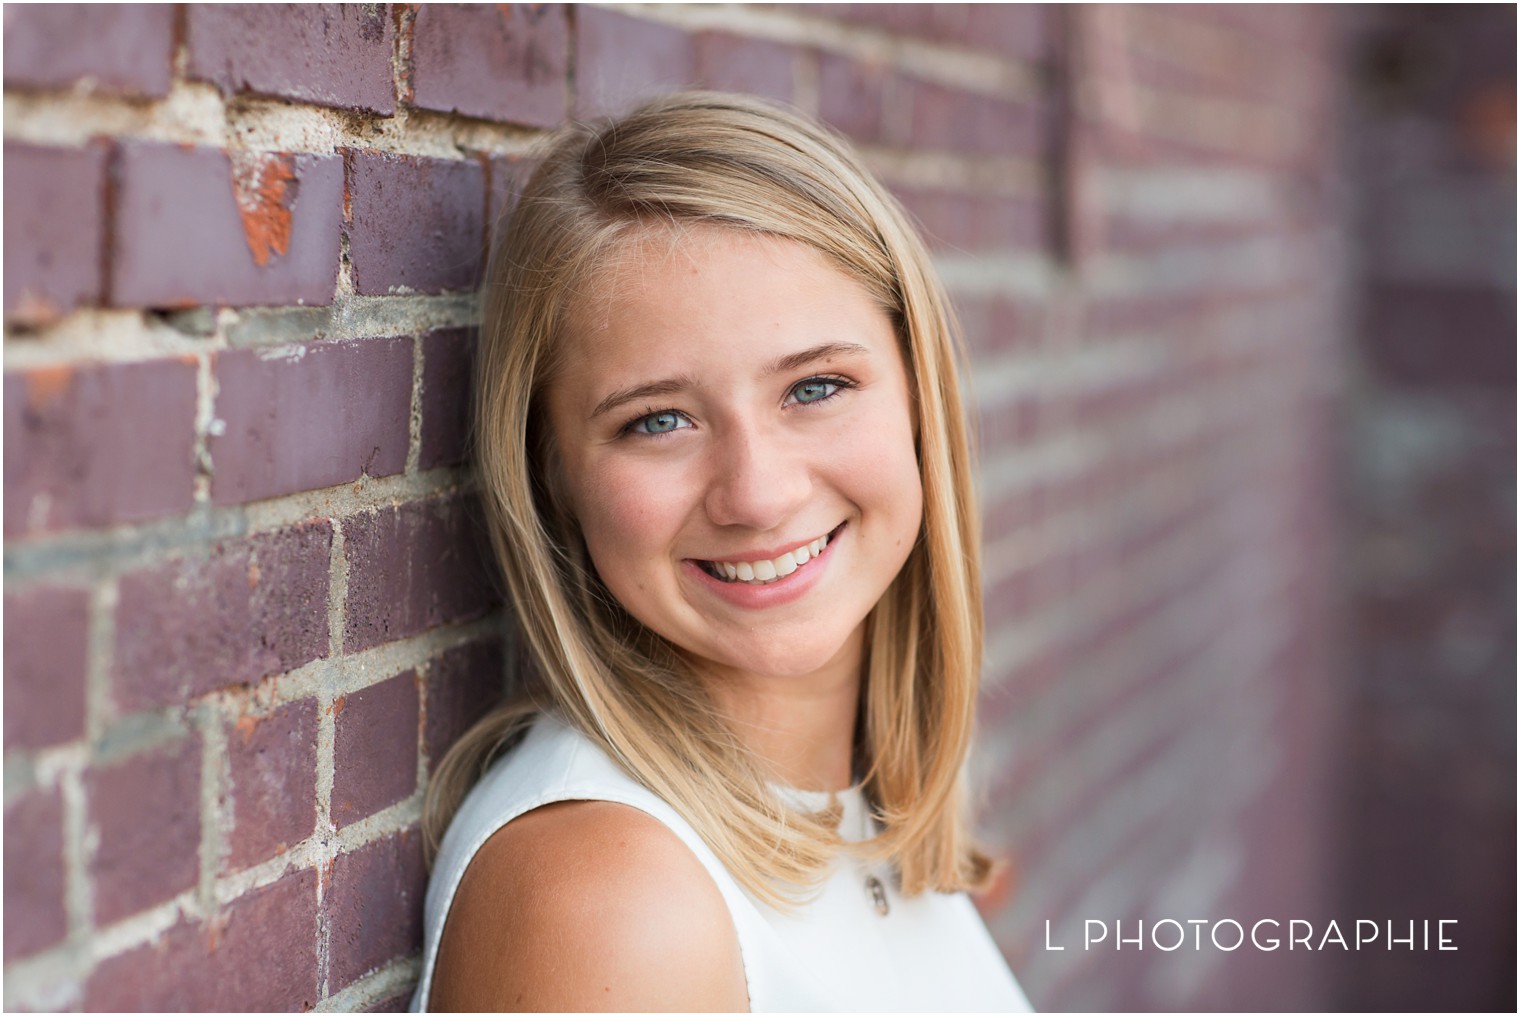 CWE,Campbell,Class of 2018,High School Senior Portraits,L Photographie high school senior pictures,L Photographie high school senior portraits,L Photographie senior pictures,L Photographie senior portraits,L Photographie seniors,L Seniors 2018,Ladue,MICDS,MICDS senior,Mary Institute and St. Louis Country Day School,Meredith Marquardt,Meredith Weinhold,Senior Pictures,Senior Portraits,St. Louis,St. Louis High School Senior Portraits,St. Louis Senior Photographer,St. Louis Senior Portraits,St. Louis county,St. Louis high school senior photographer,St. Louis high school senior pictures,St. Louis senior pictures,best high school senior photographer,central west end,city senior pictures,city session,high school senior pictures,natural light portraits,outdoor portraits,private school,senior pictures in the Central West End,senior session,